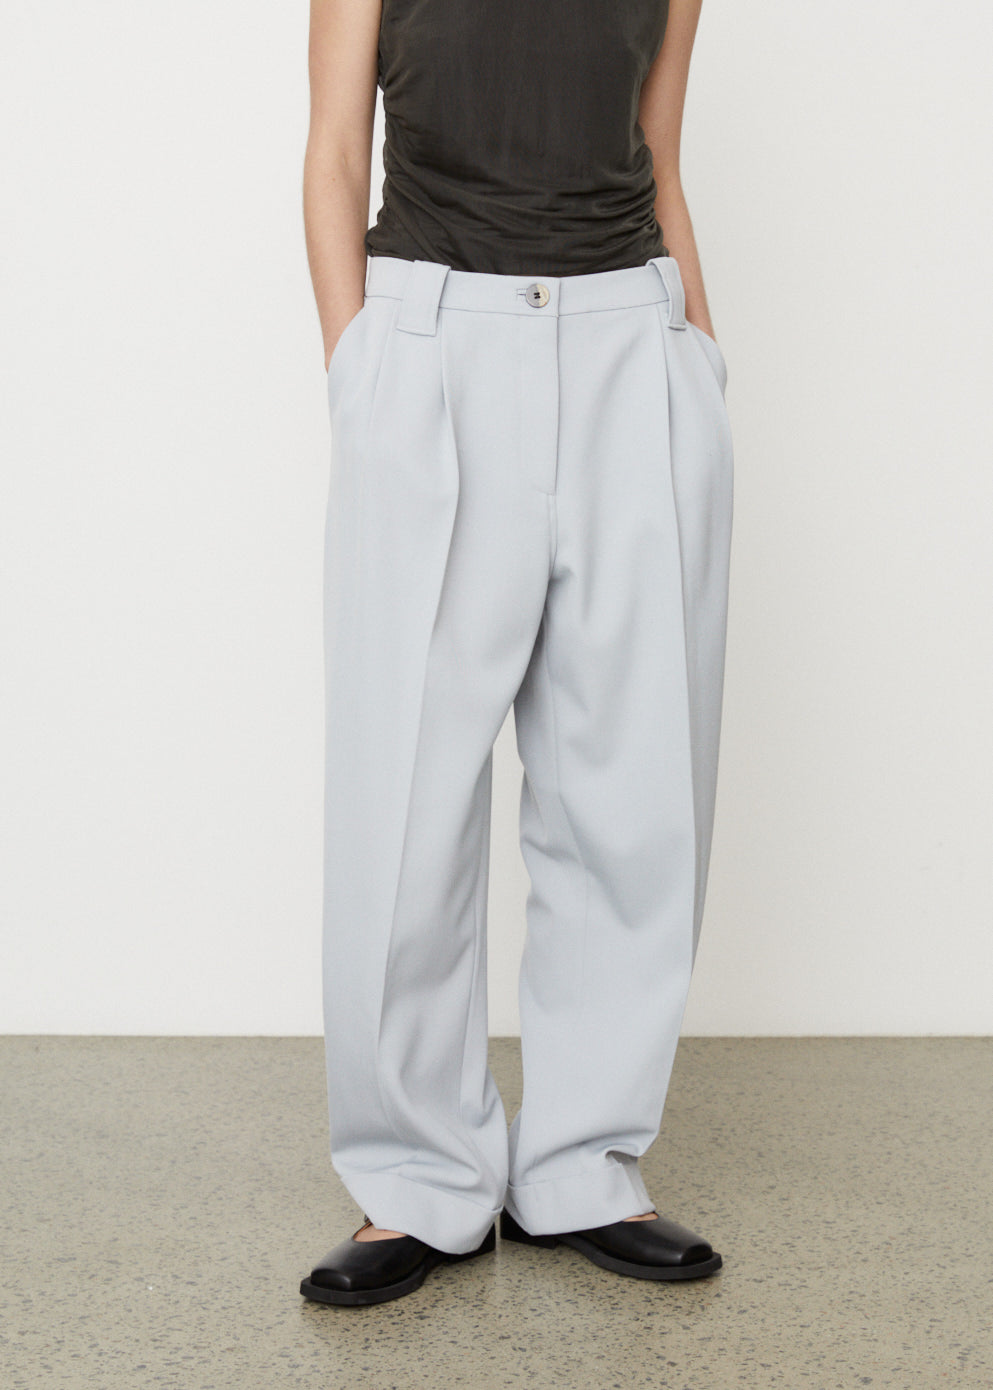 Twill Suiting Pleated Pants